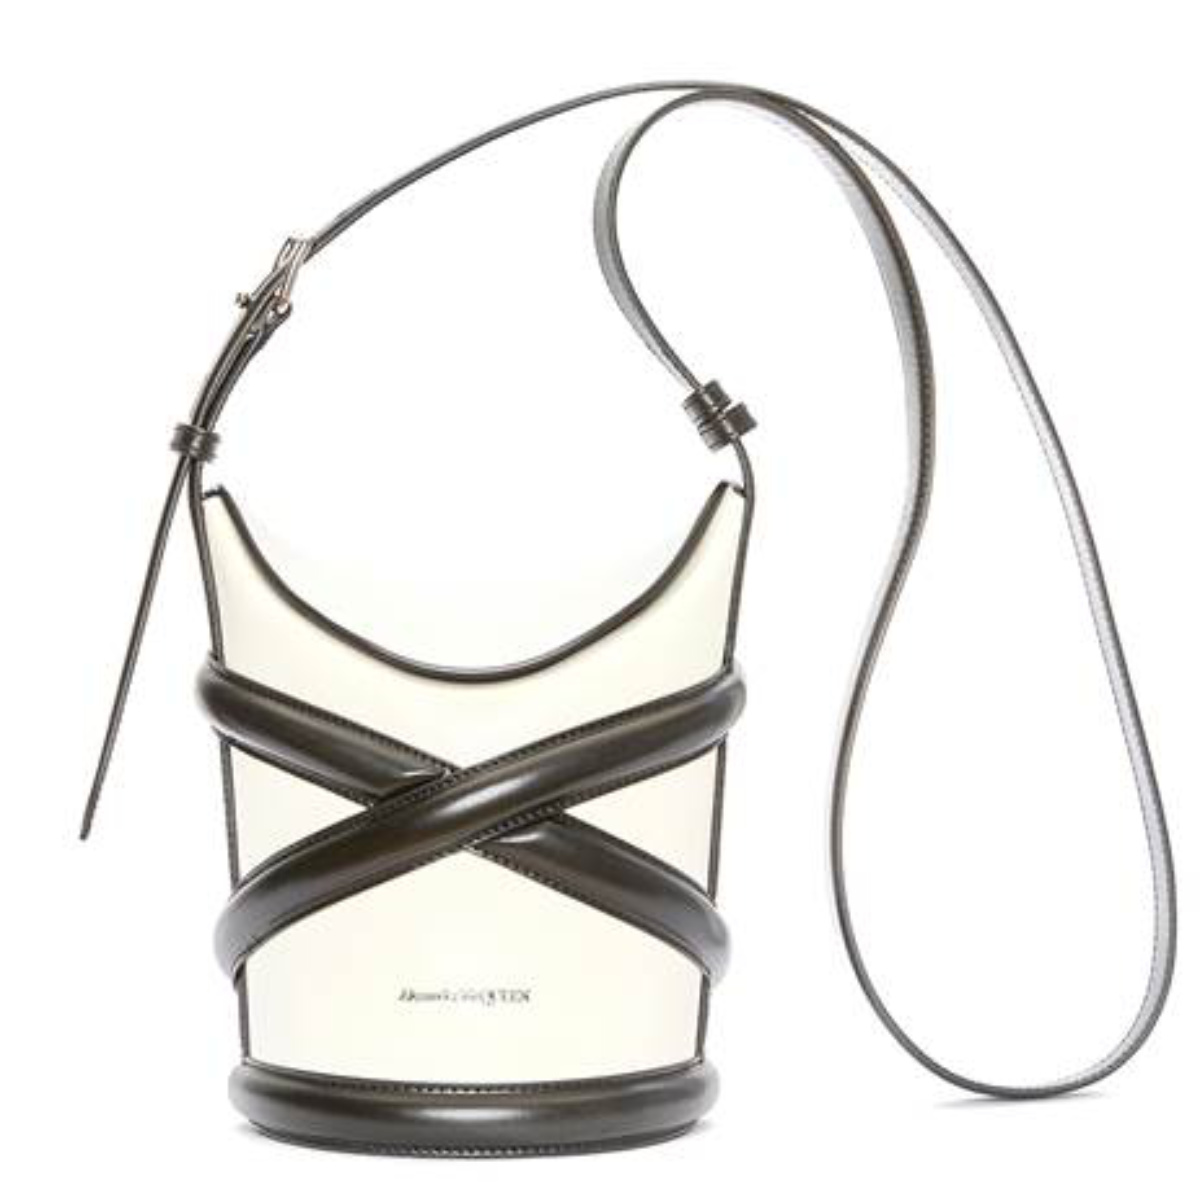 Alexander McQueen introduces its new Bag - The Curve